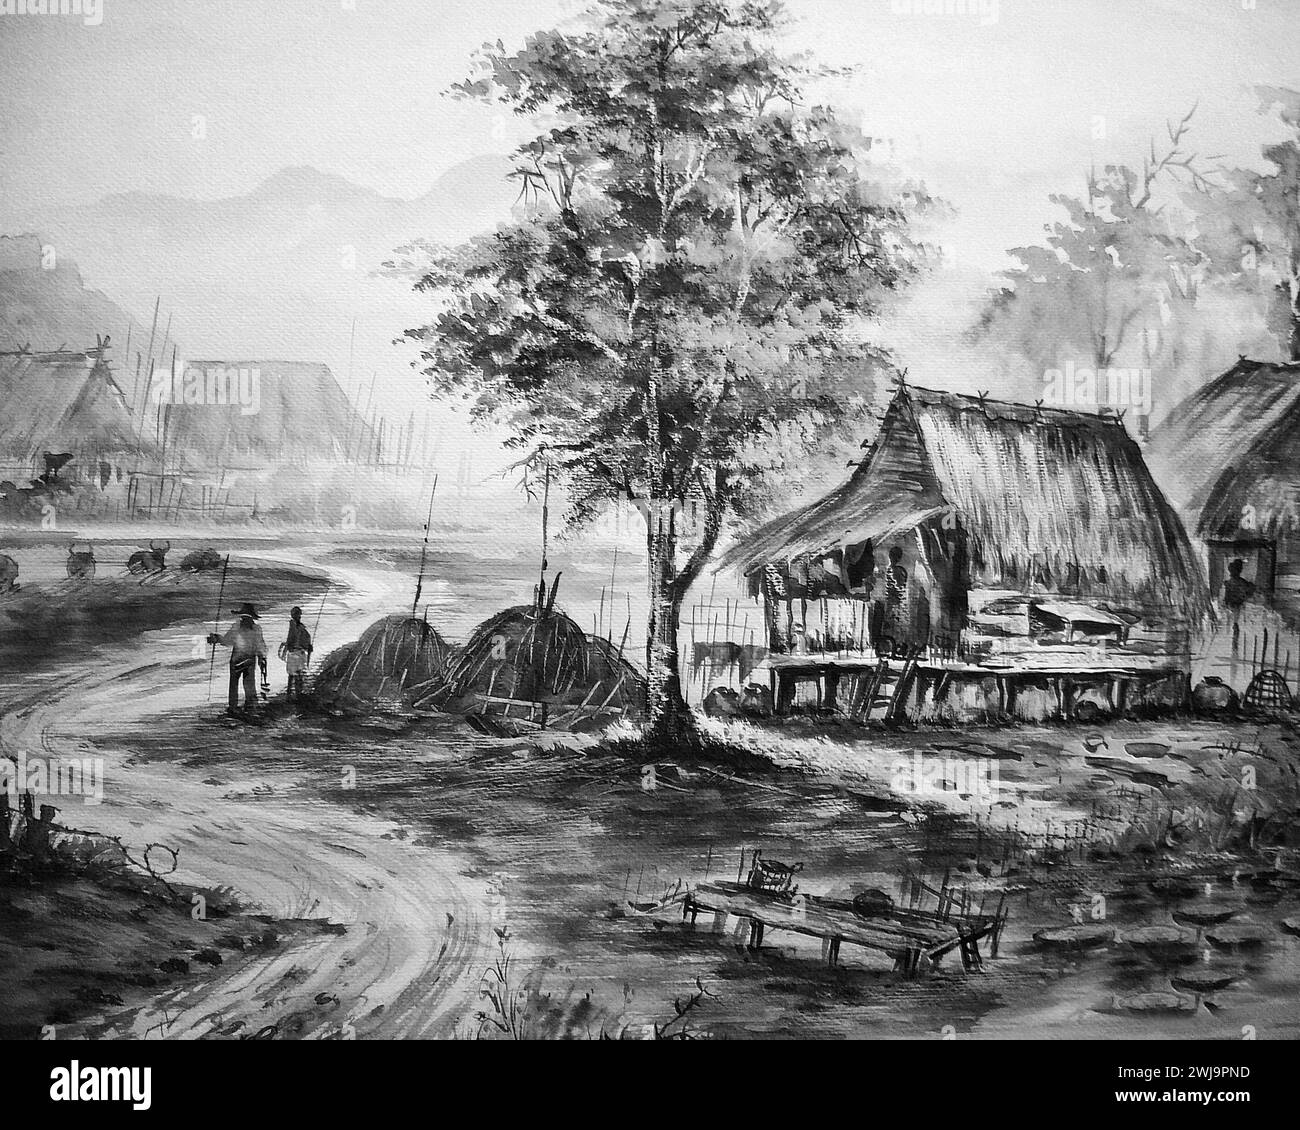 monochrome photography black and white original oil painting countryside rural thailand Stock Photo